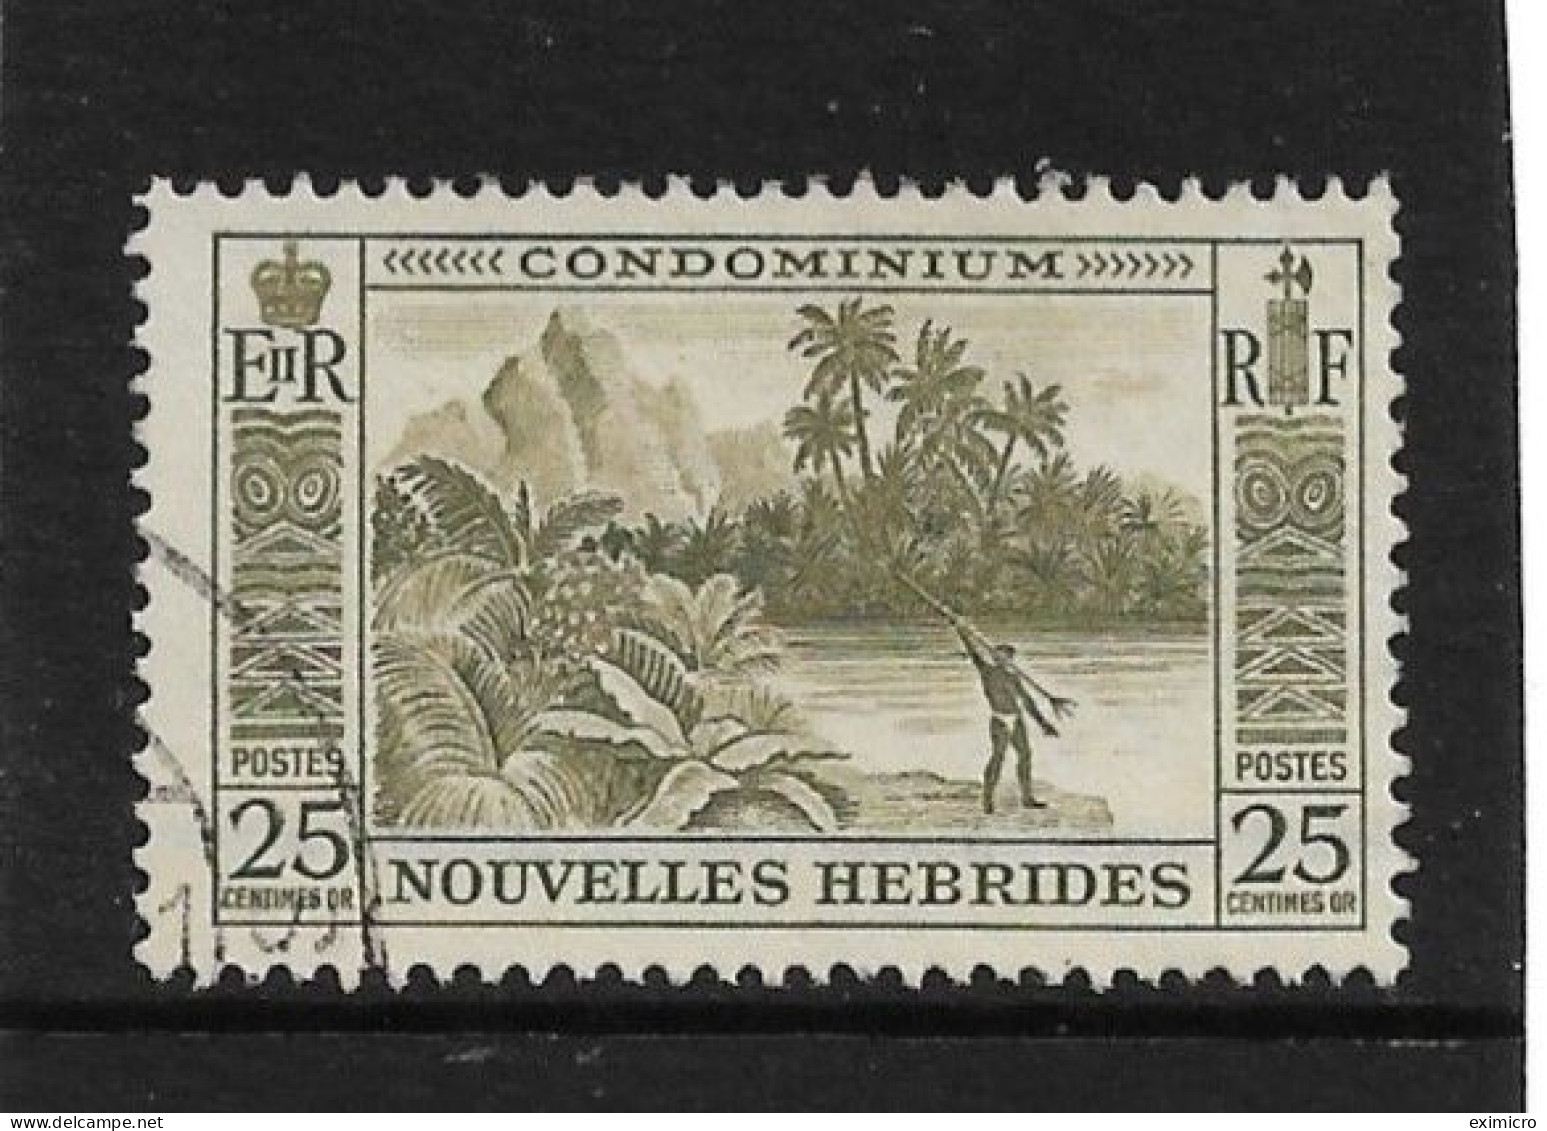 NEW HEBRIDES (FRENCH CURRENCY) 1957 25c SG F100 FINE USED - Usados